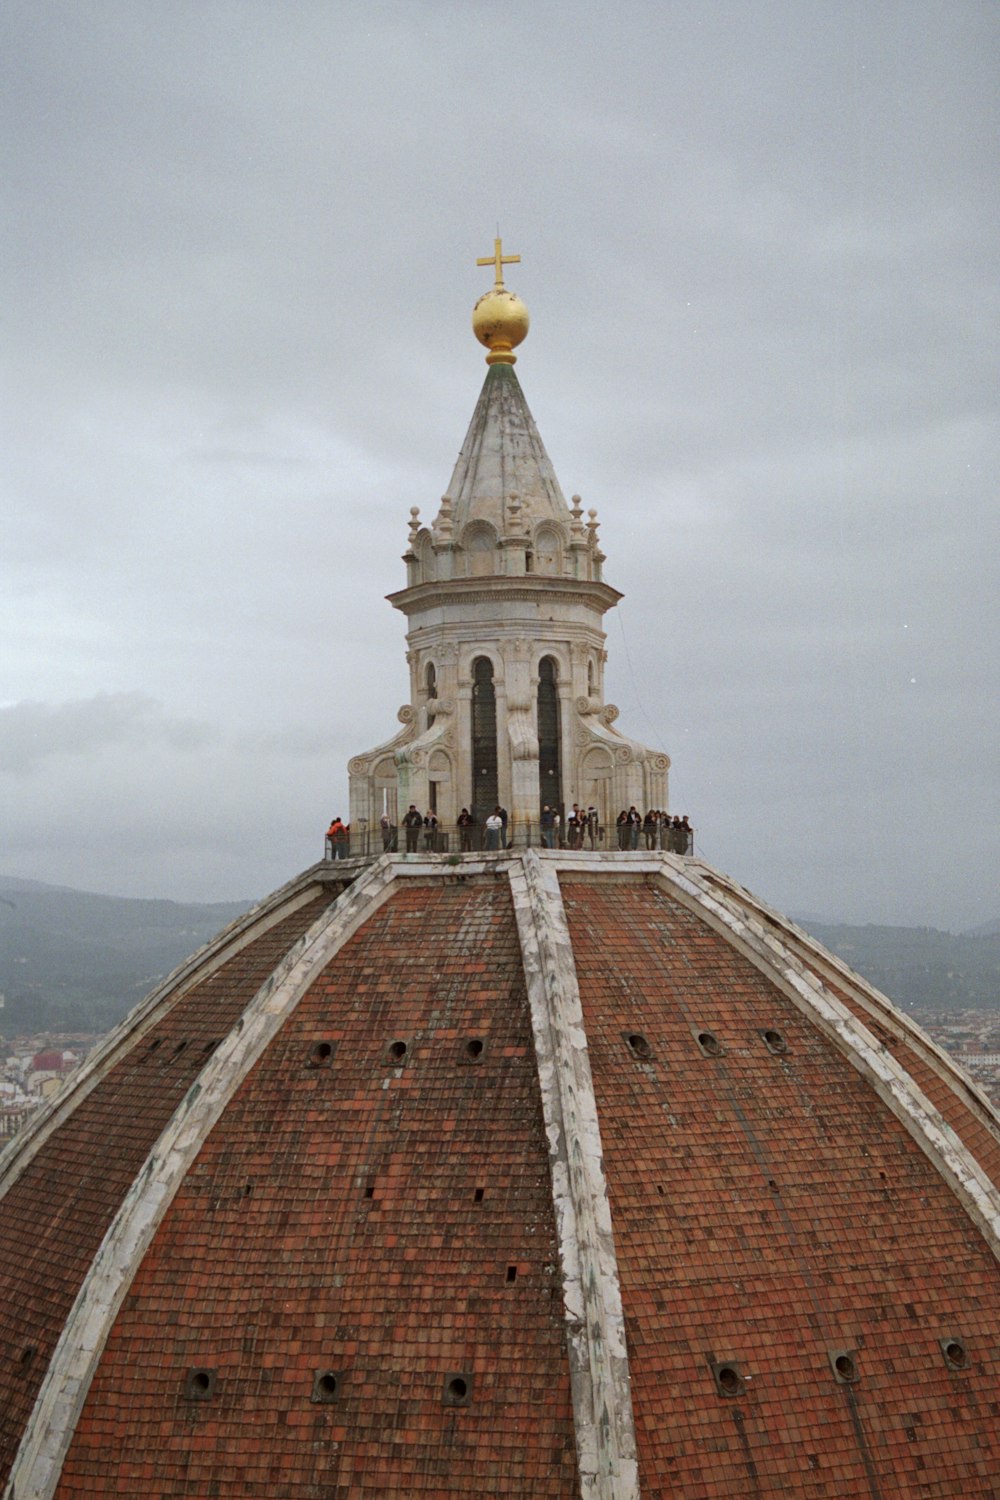 a large dome with a golden cross on top of it